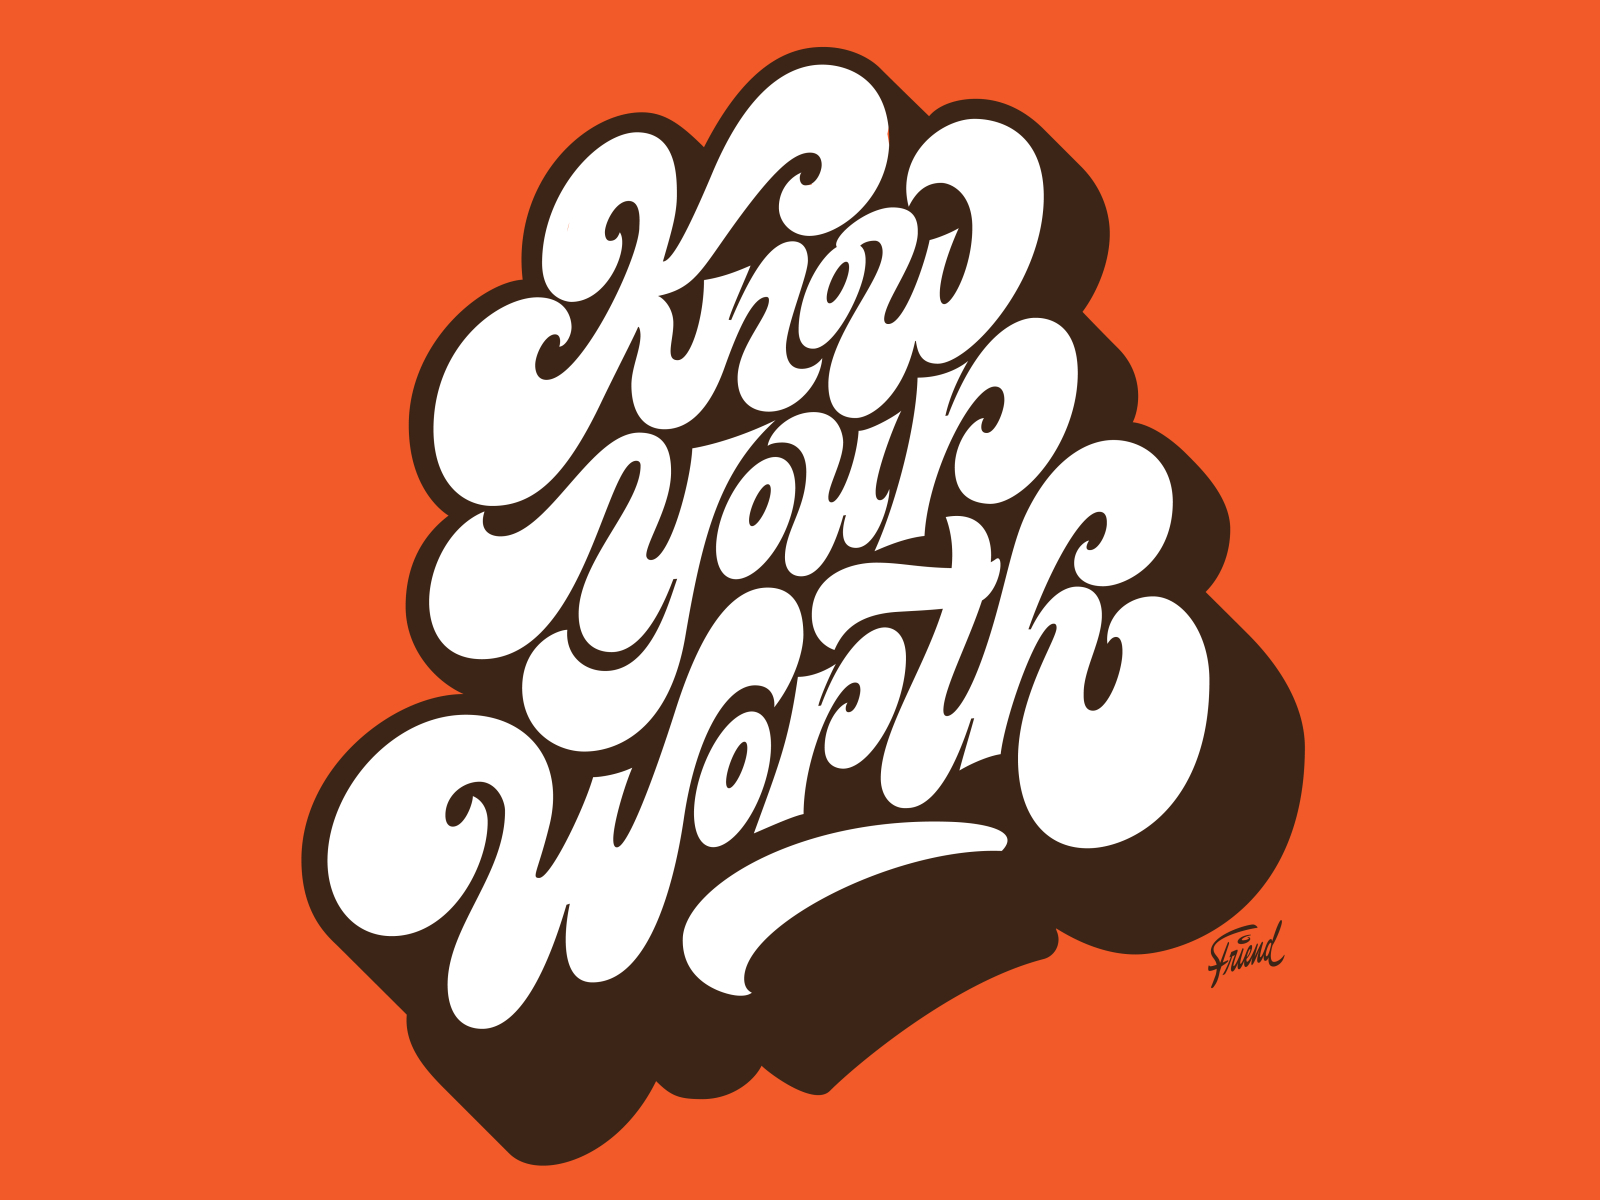 Know Your Worth by Jeremy Friend on Dribbble